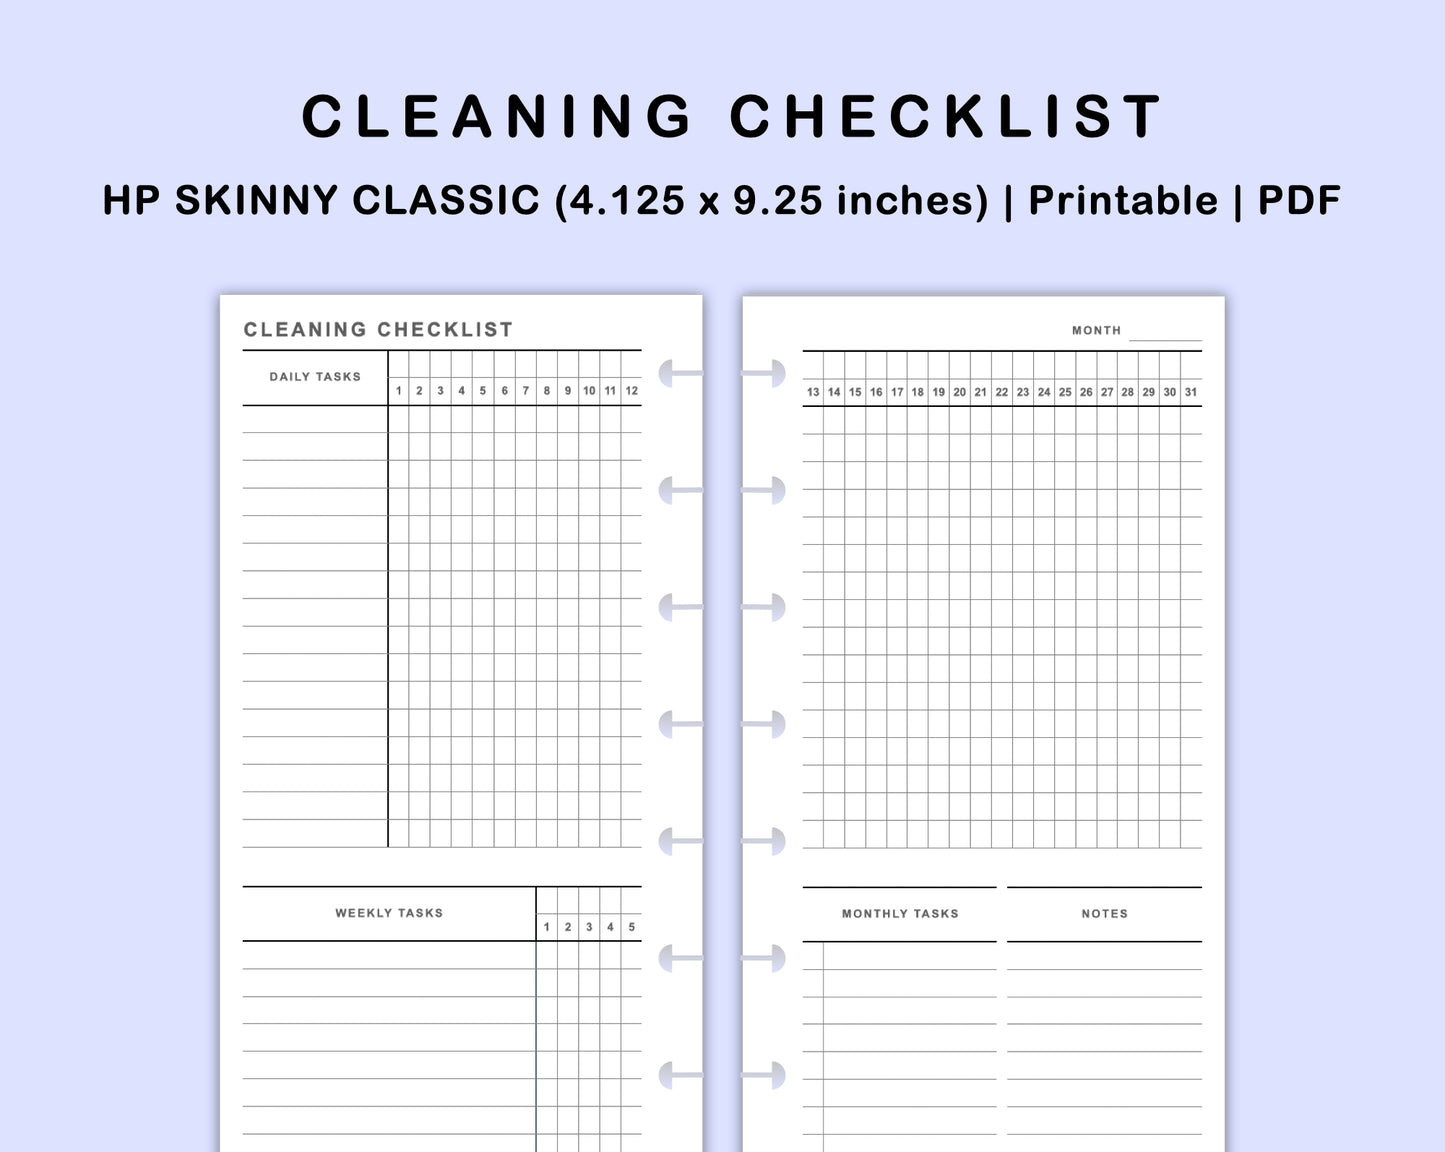 Skinny Classic HP Inserts - Cleaning Checklist